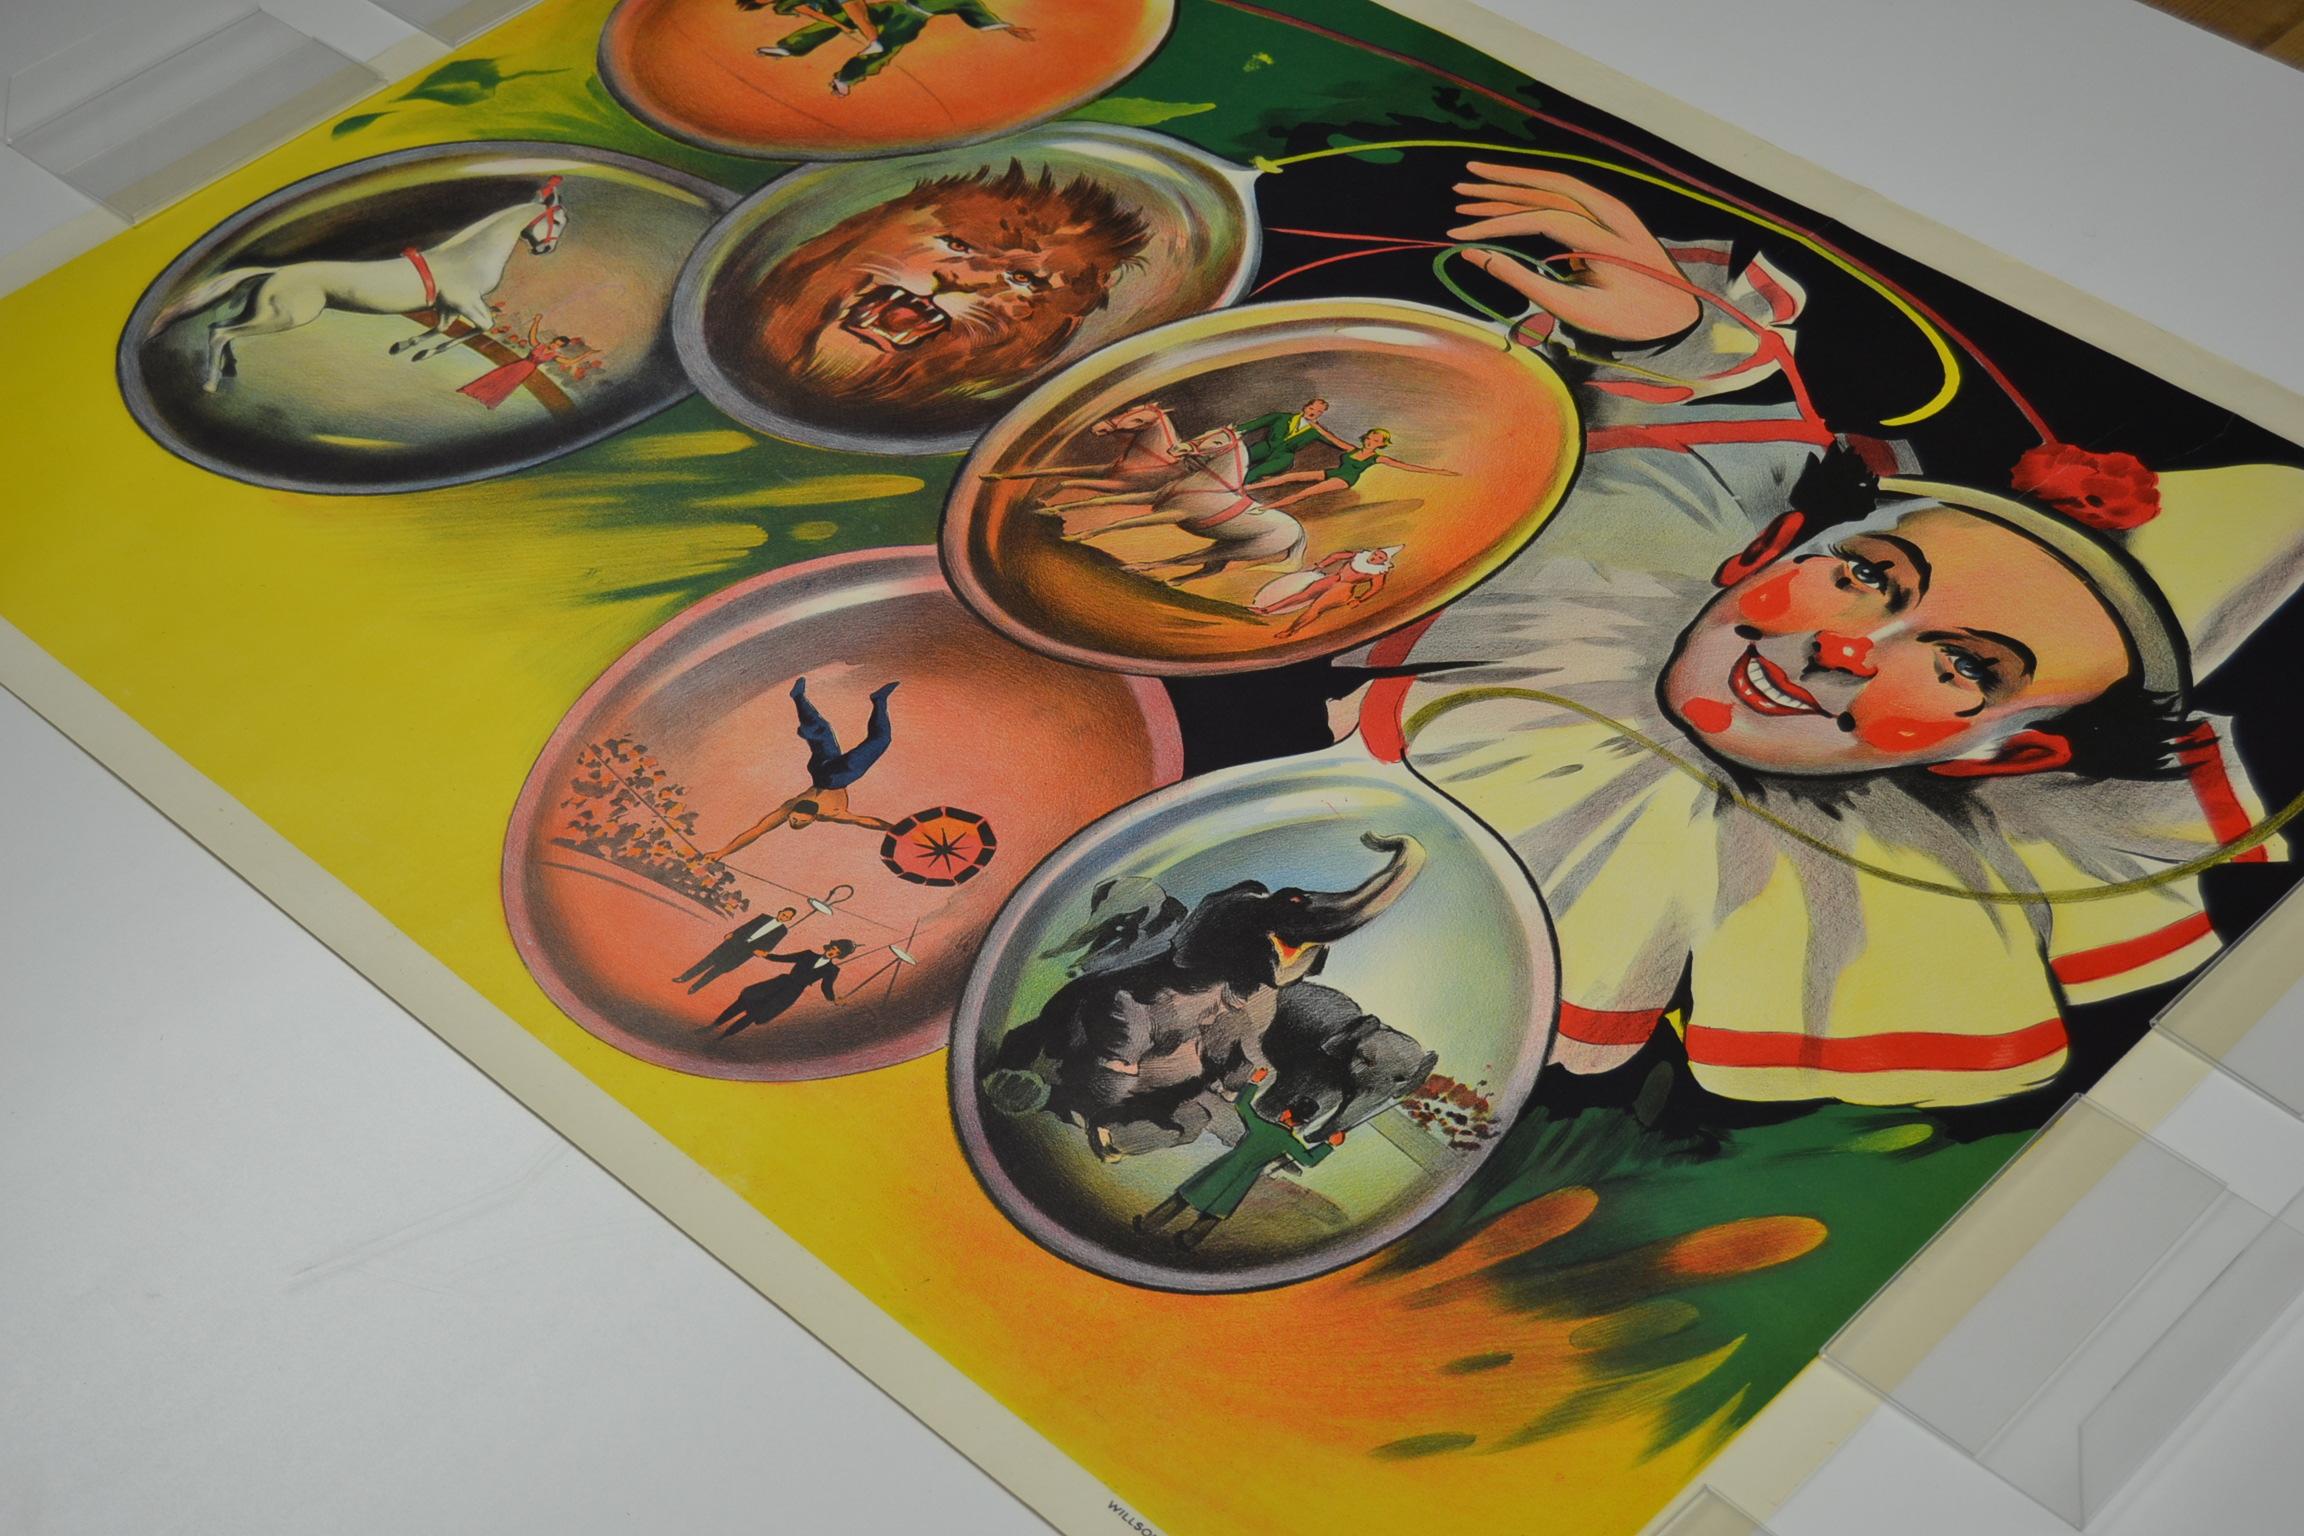 Litho Circus Poster with Clown and Circus Scenes Printed by Willsons Leicester 1